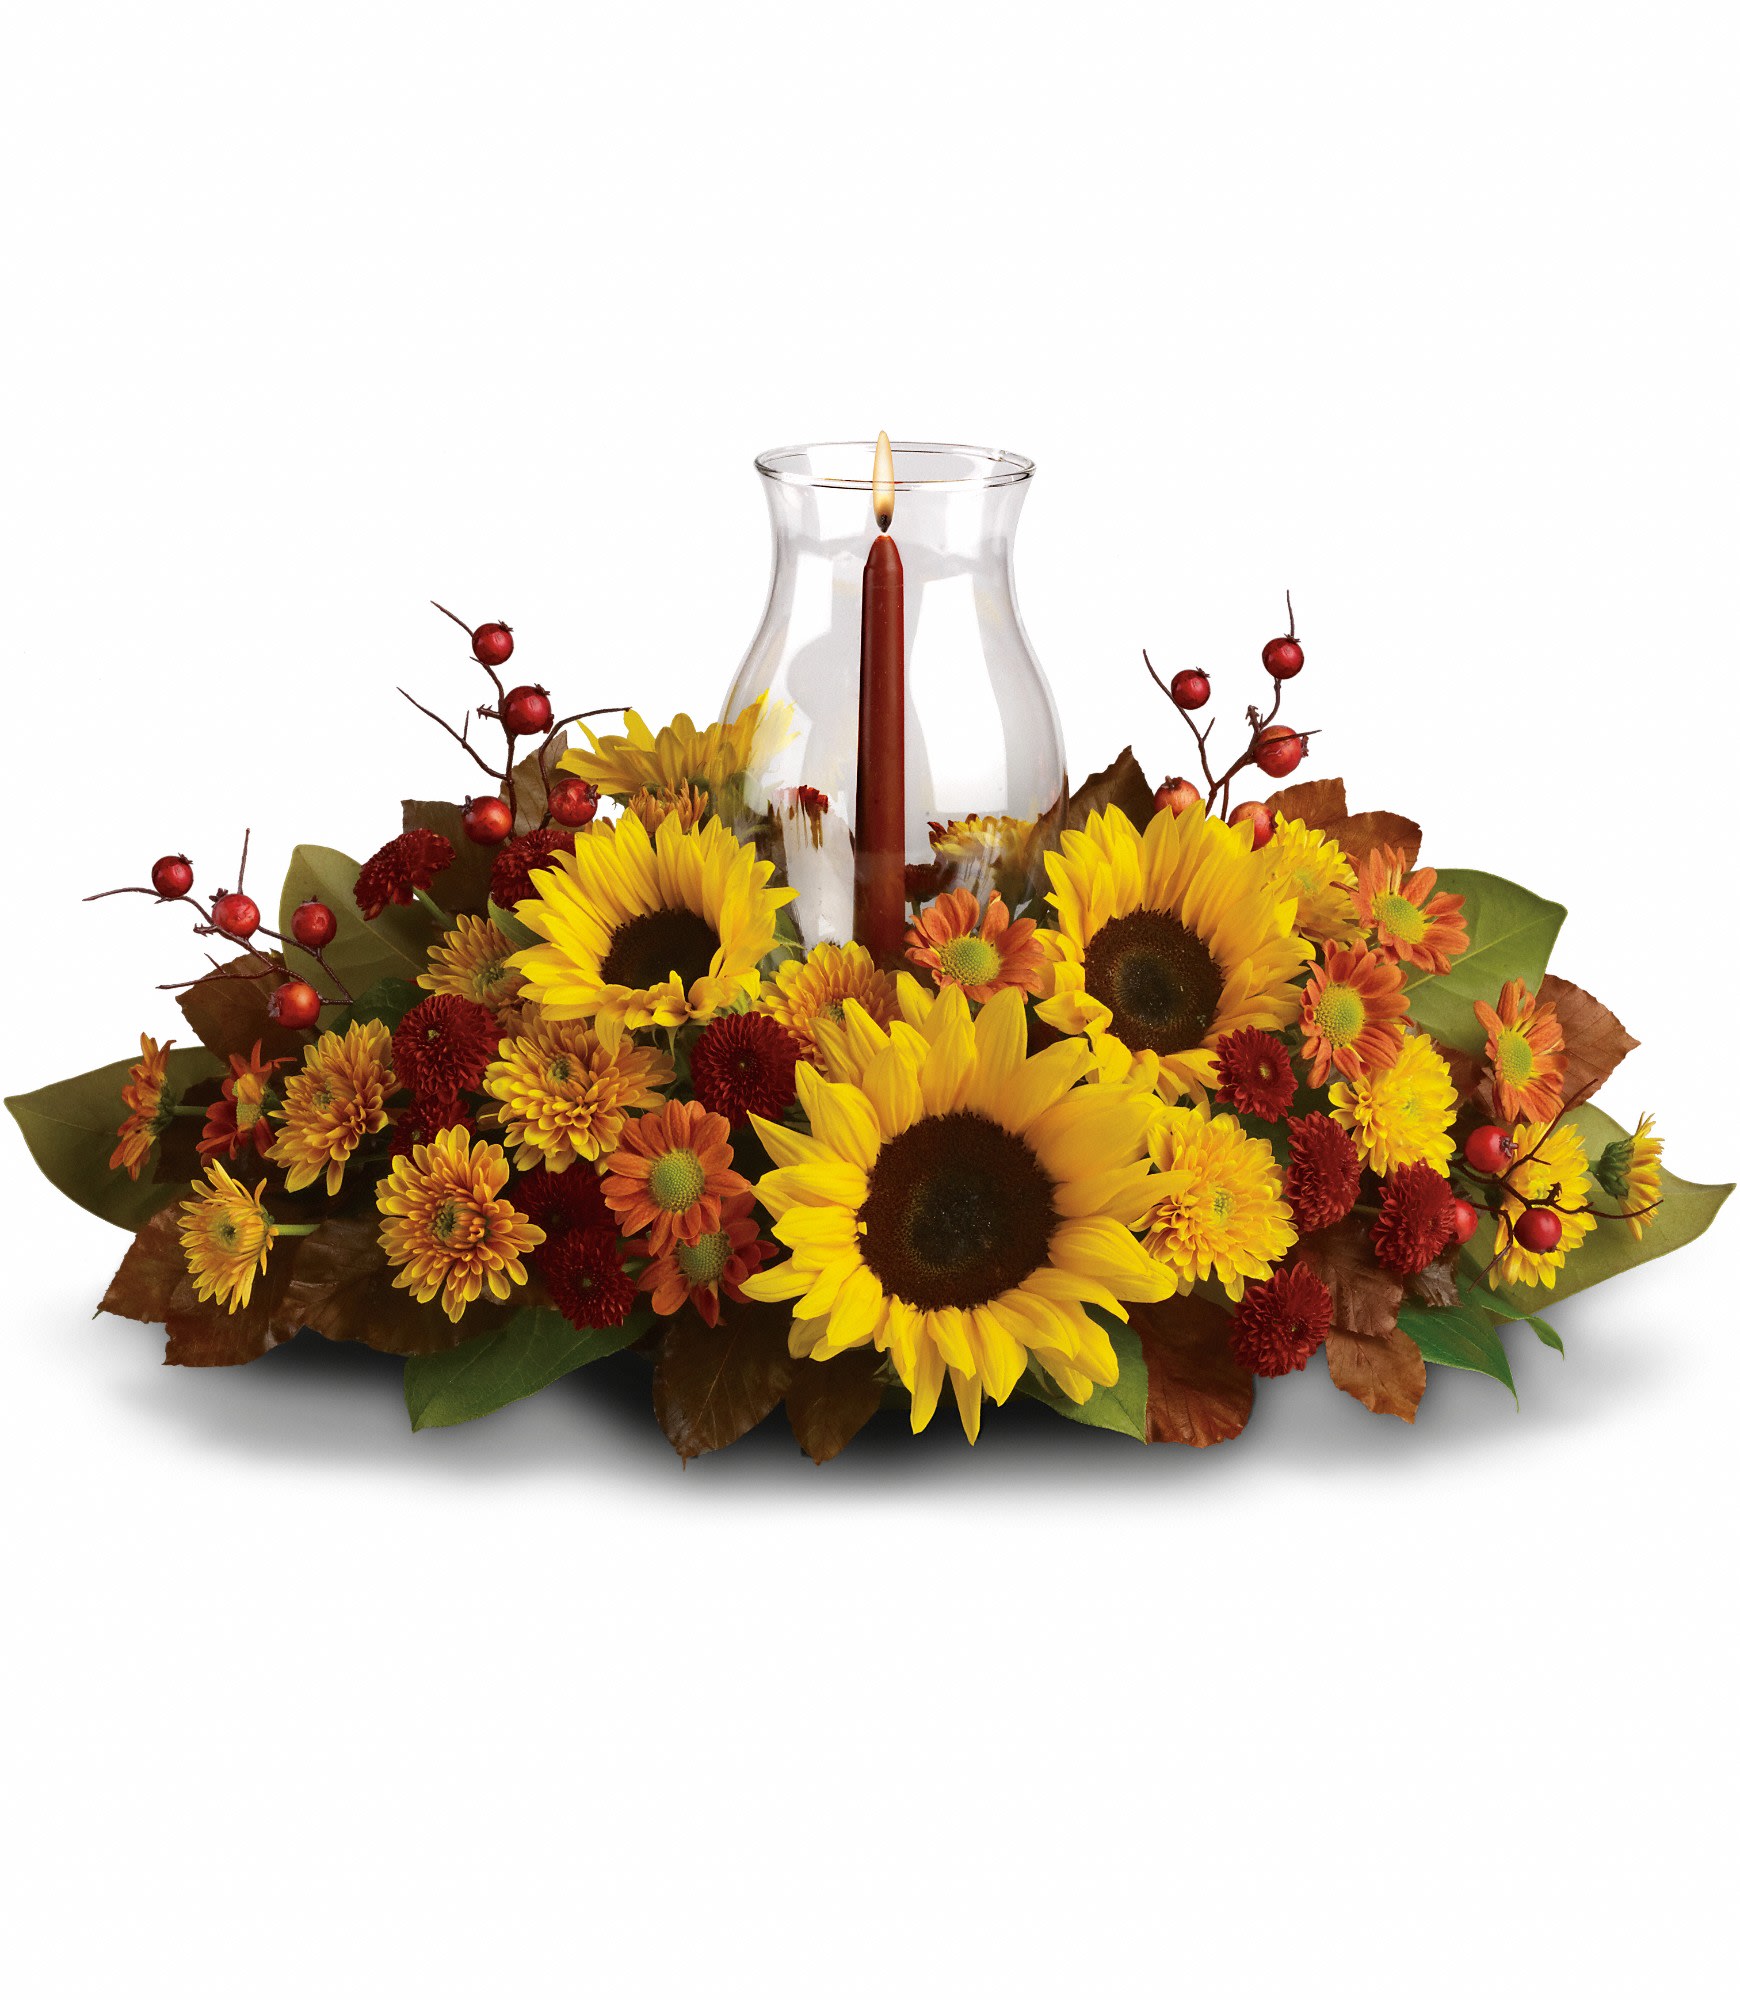 Sunflower Centerpiece - Along with brilliant sunflowers, you'll find yellow spray roses, bronze and rust chrysanthemums, red berries, magnolia leaves and of course an elegant tapered candle inside a hurricane vase. Approximately 21&quot; W x 12&quot; H. T170-1A